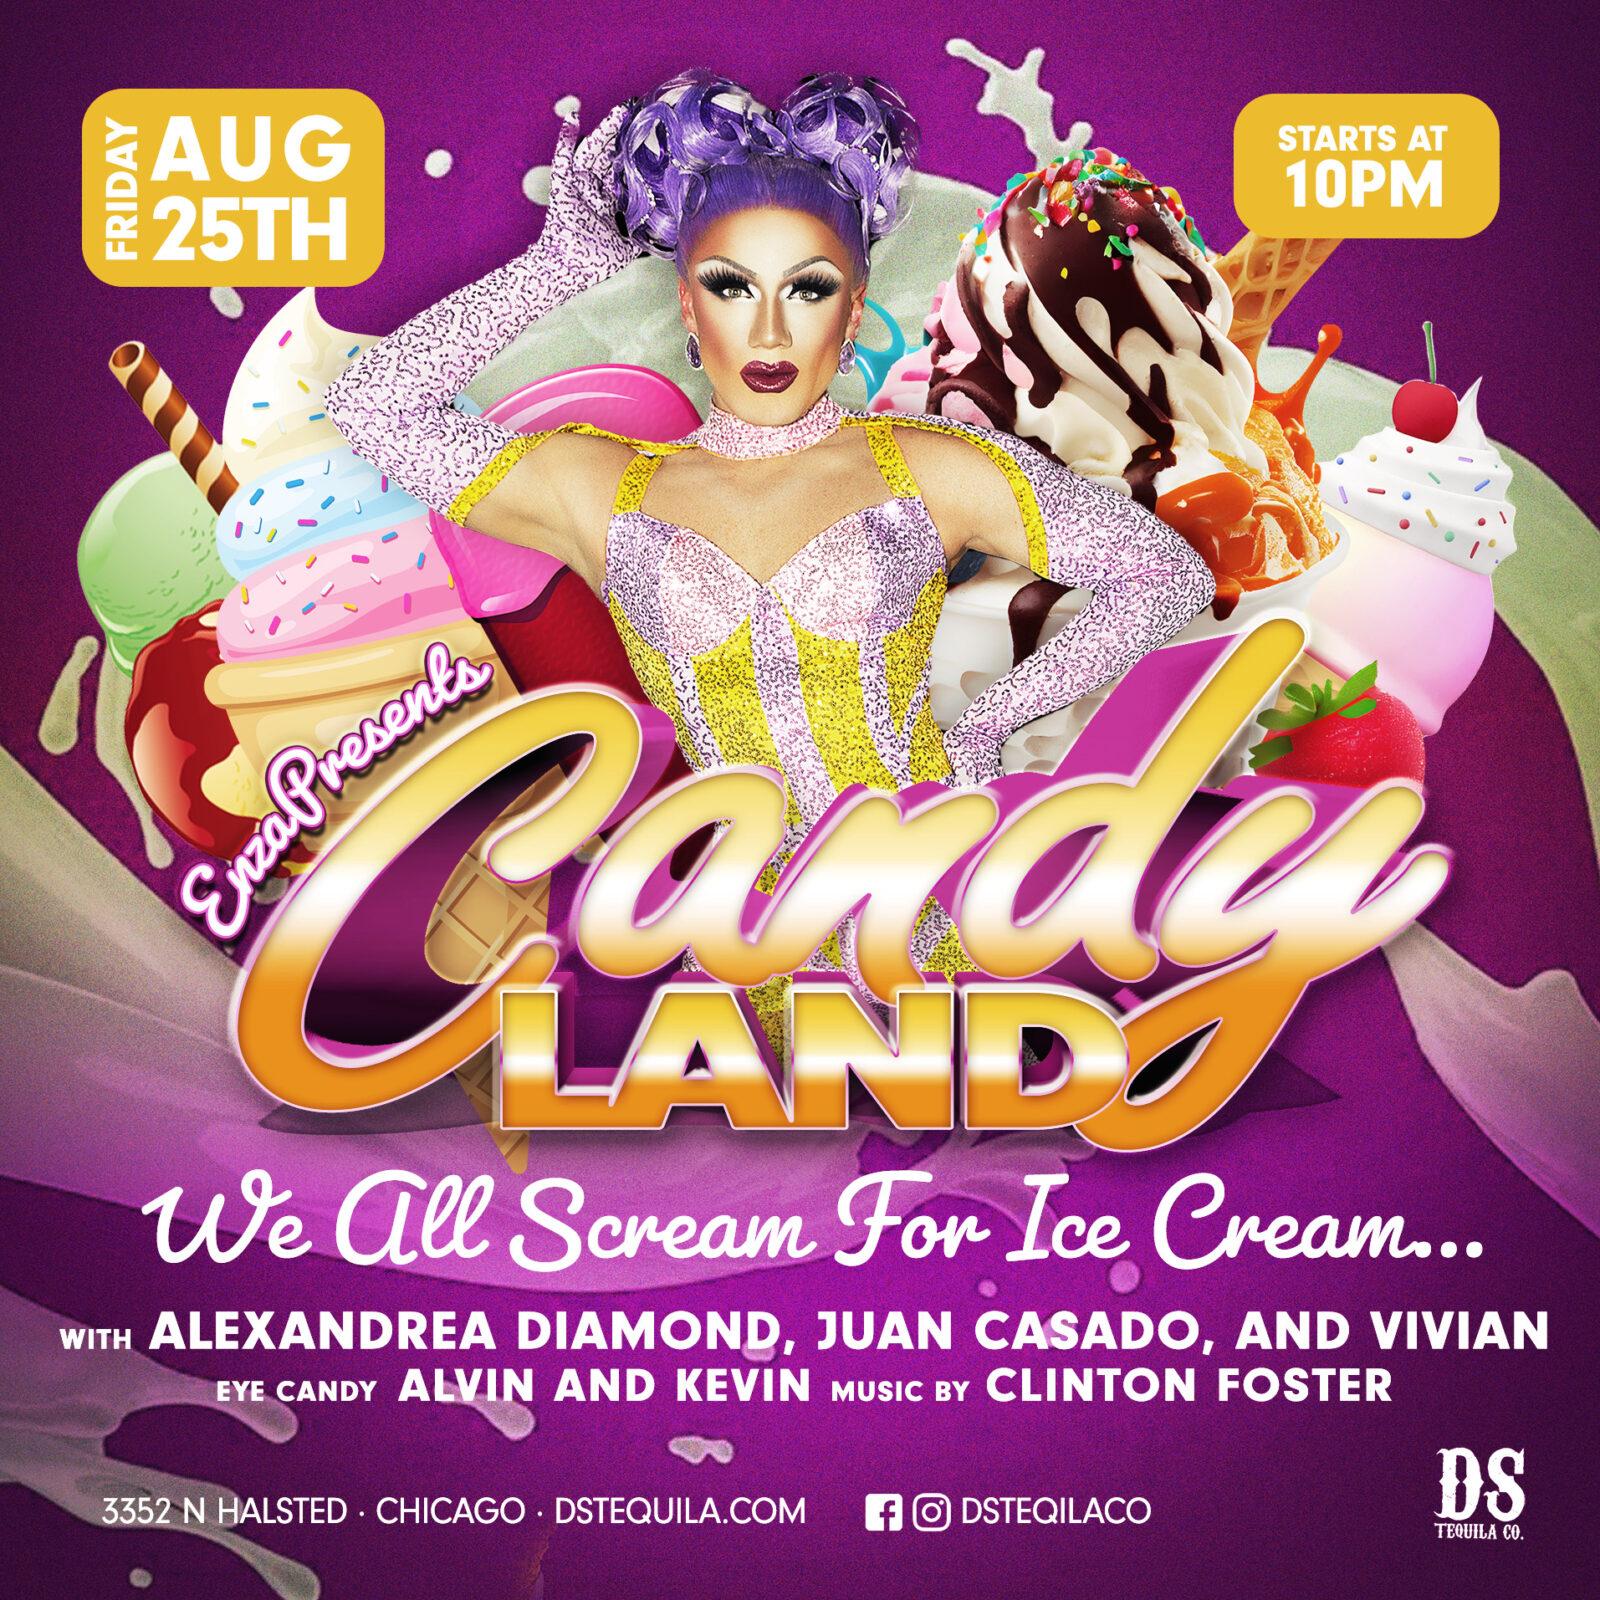 Candyland: We All Scream for Ice Cream, Presented By Enza ⋆ D.S ...